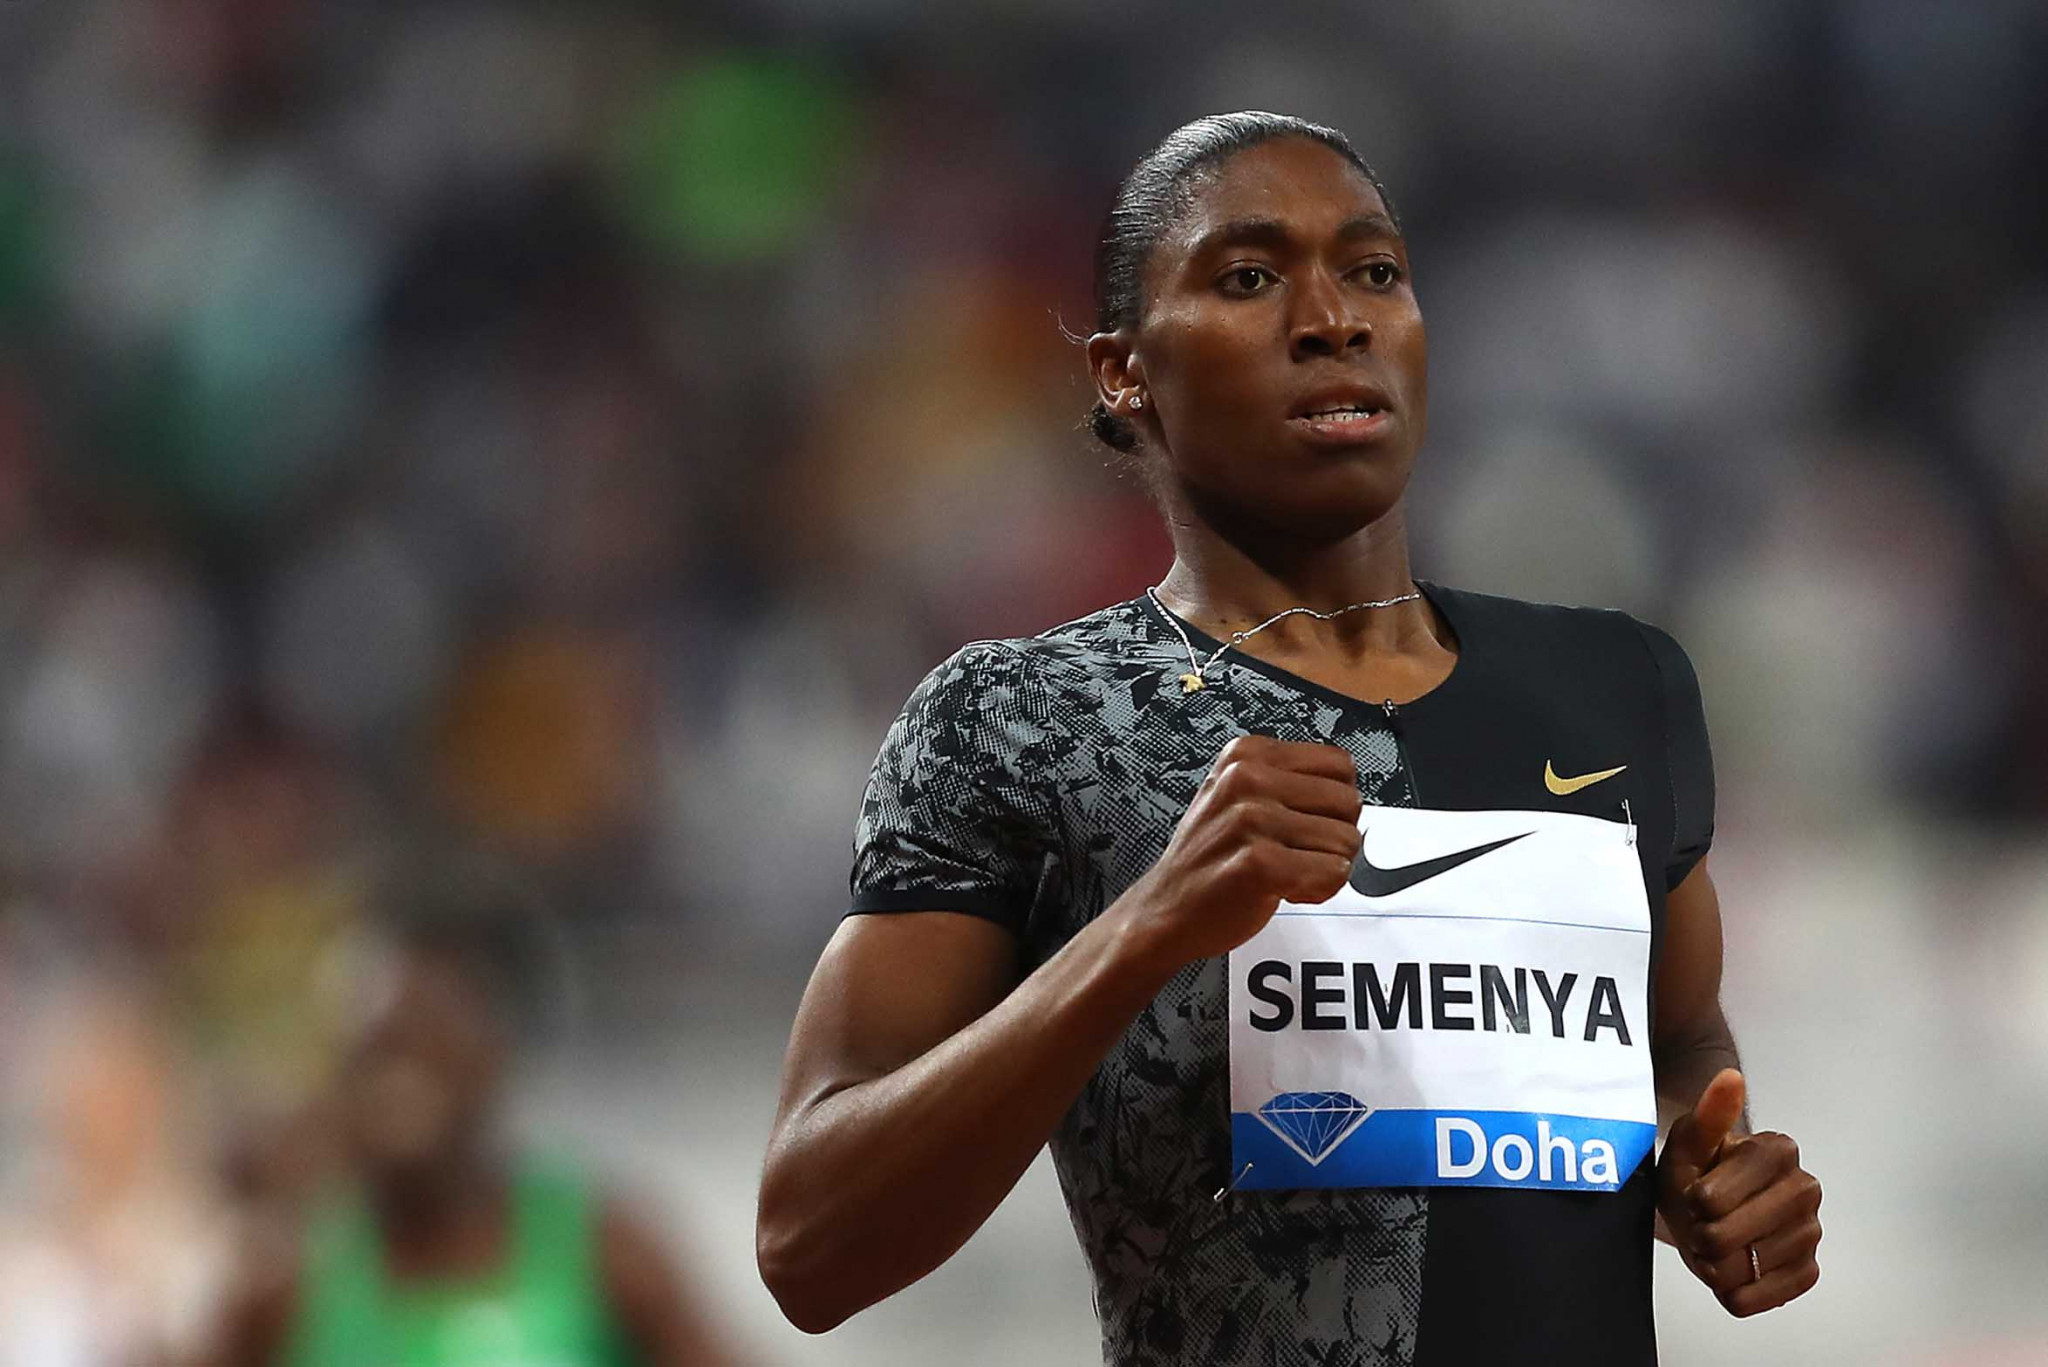 Caster Semenya has appealed to the Federal Supreme Court of Switzerland against the Court of Arbitration for Sport decision to back the IAAF and ban her from competing in distances between 400 metres and the mile unless she reduces her testosterone levels